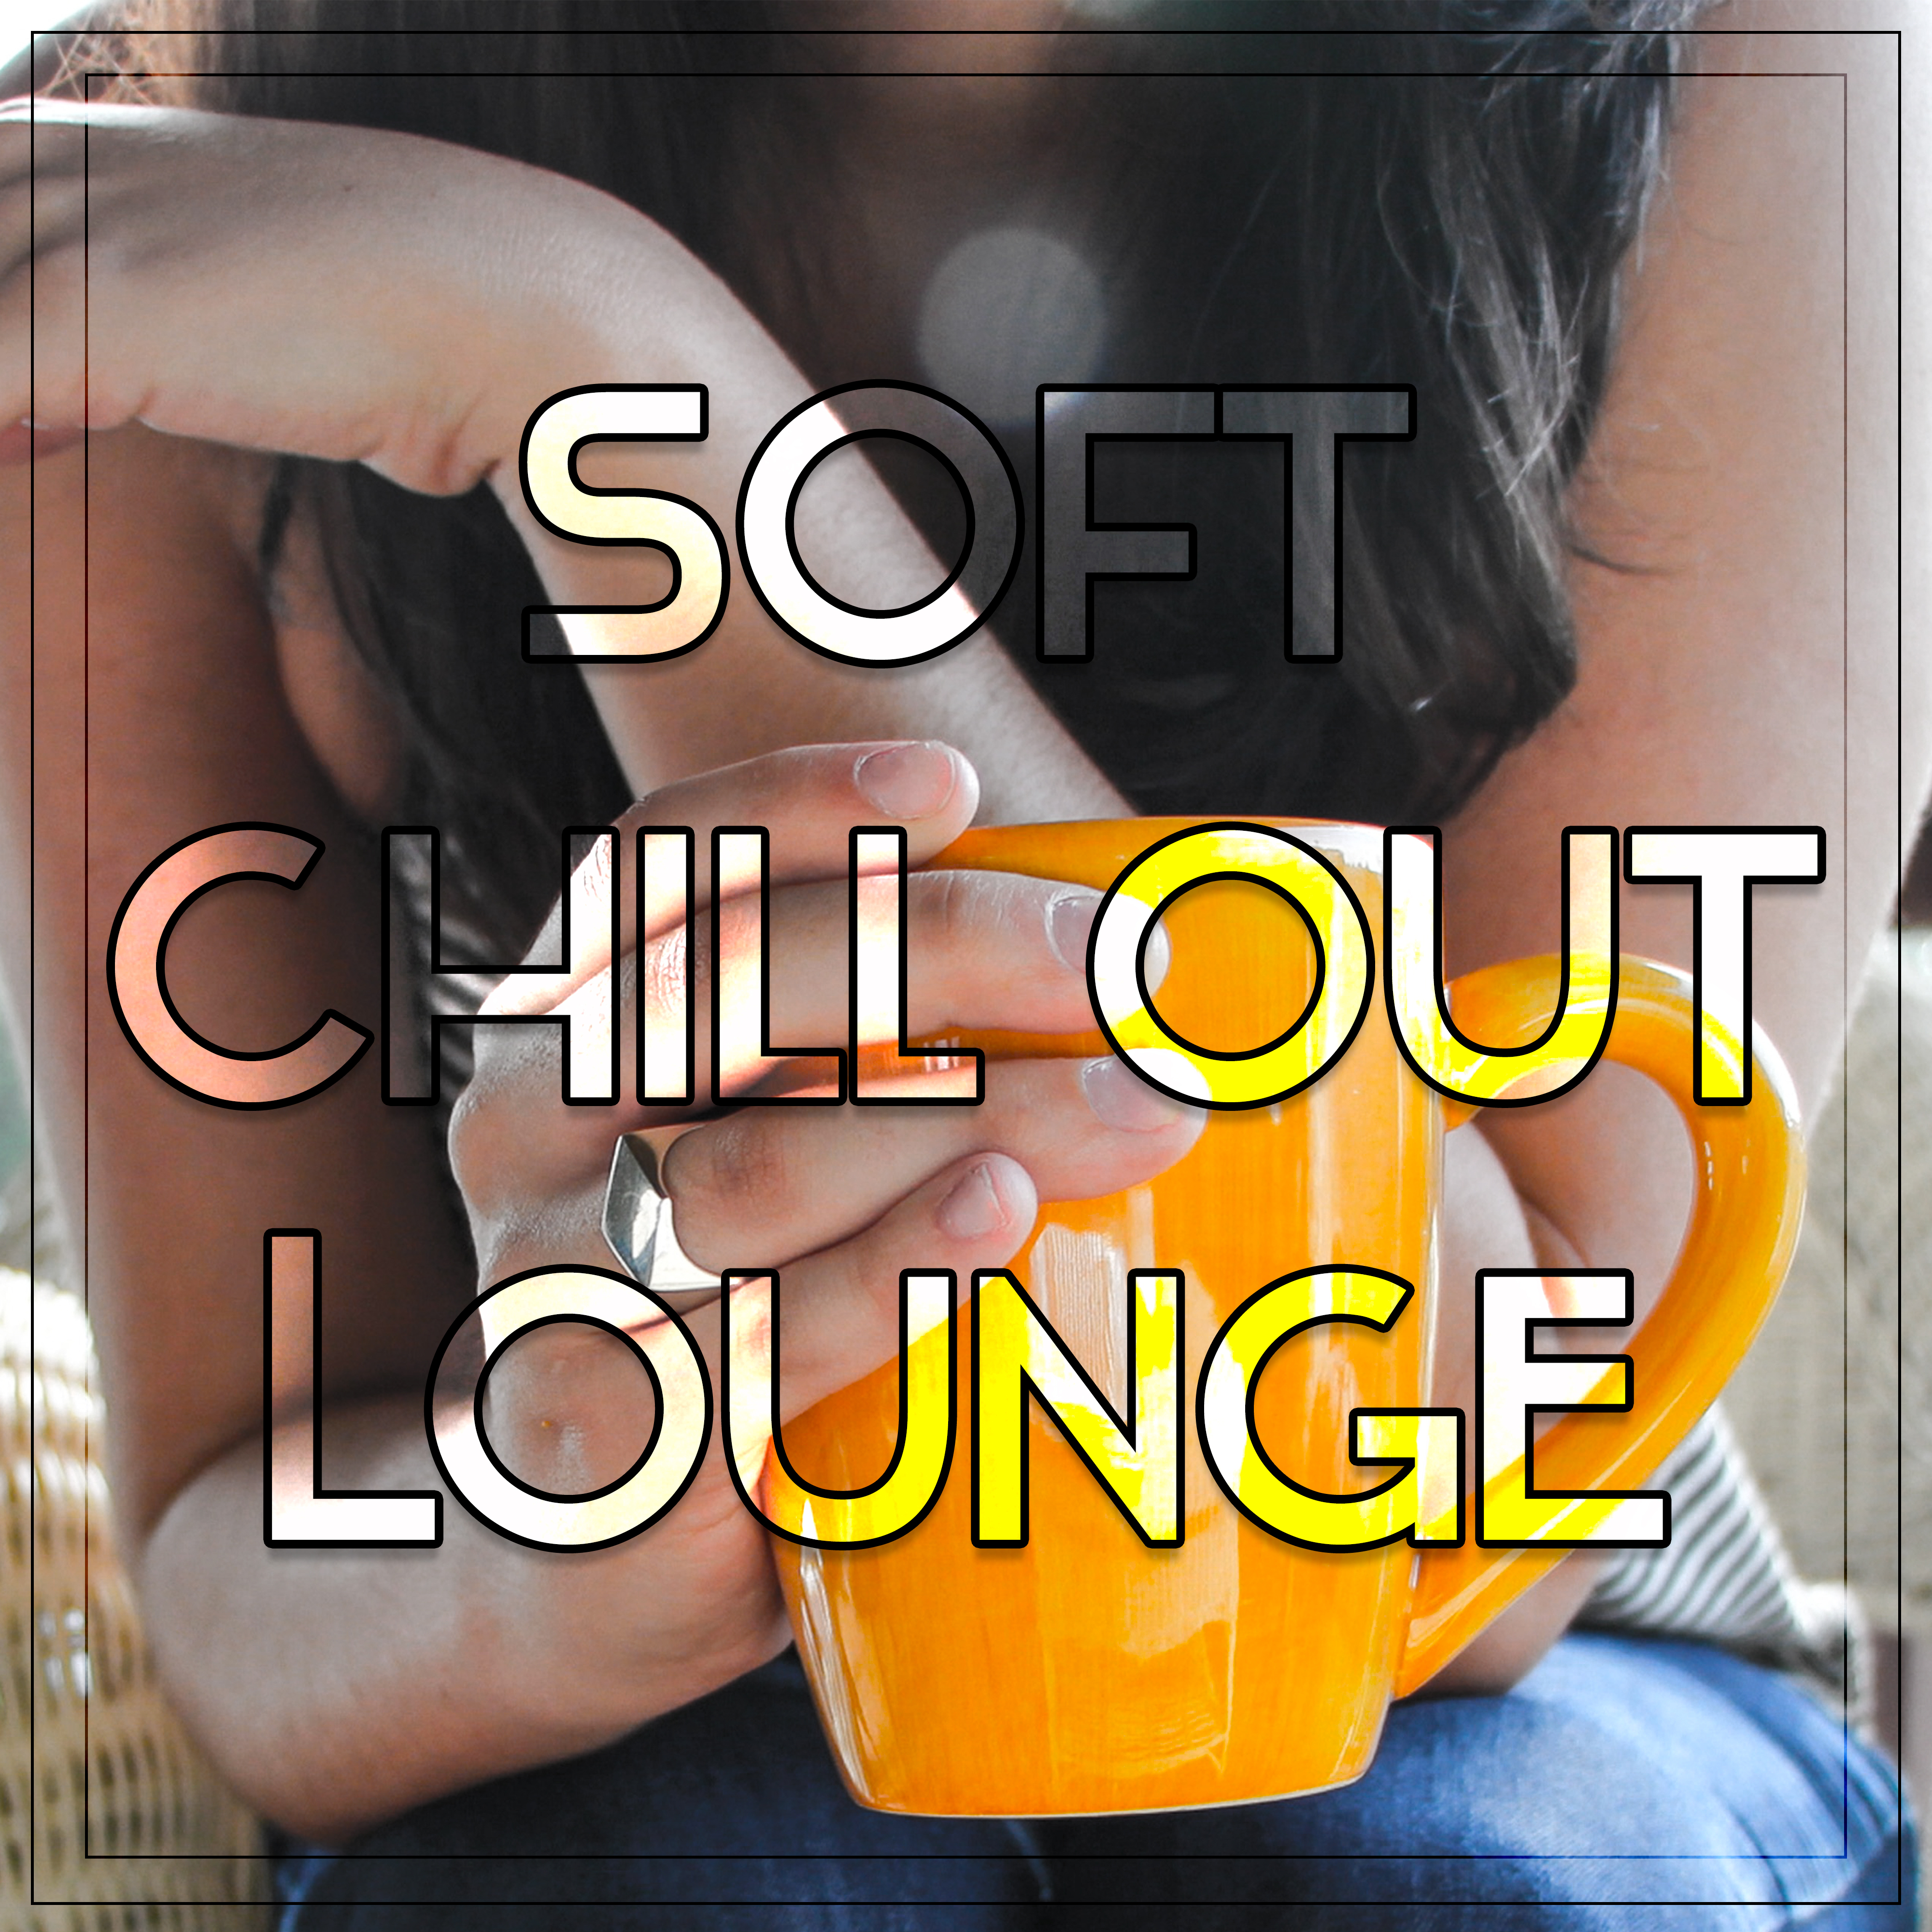 Soft Chill Out Lounge – Relaxing Music, Stress Relief, Summertime Rest, Holiday Music